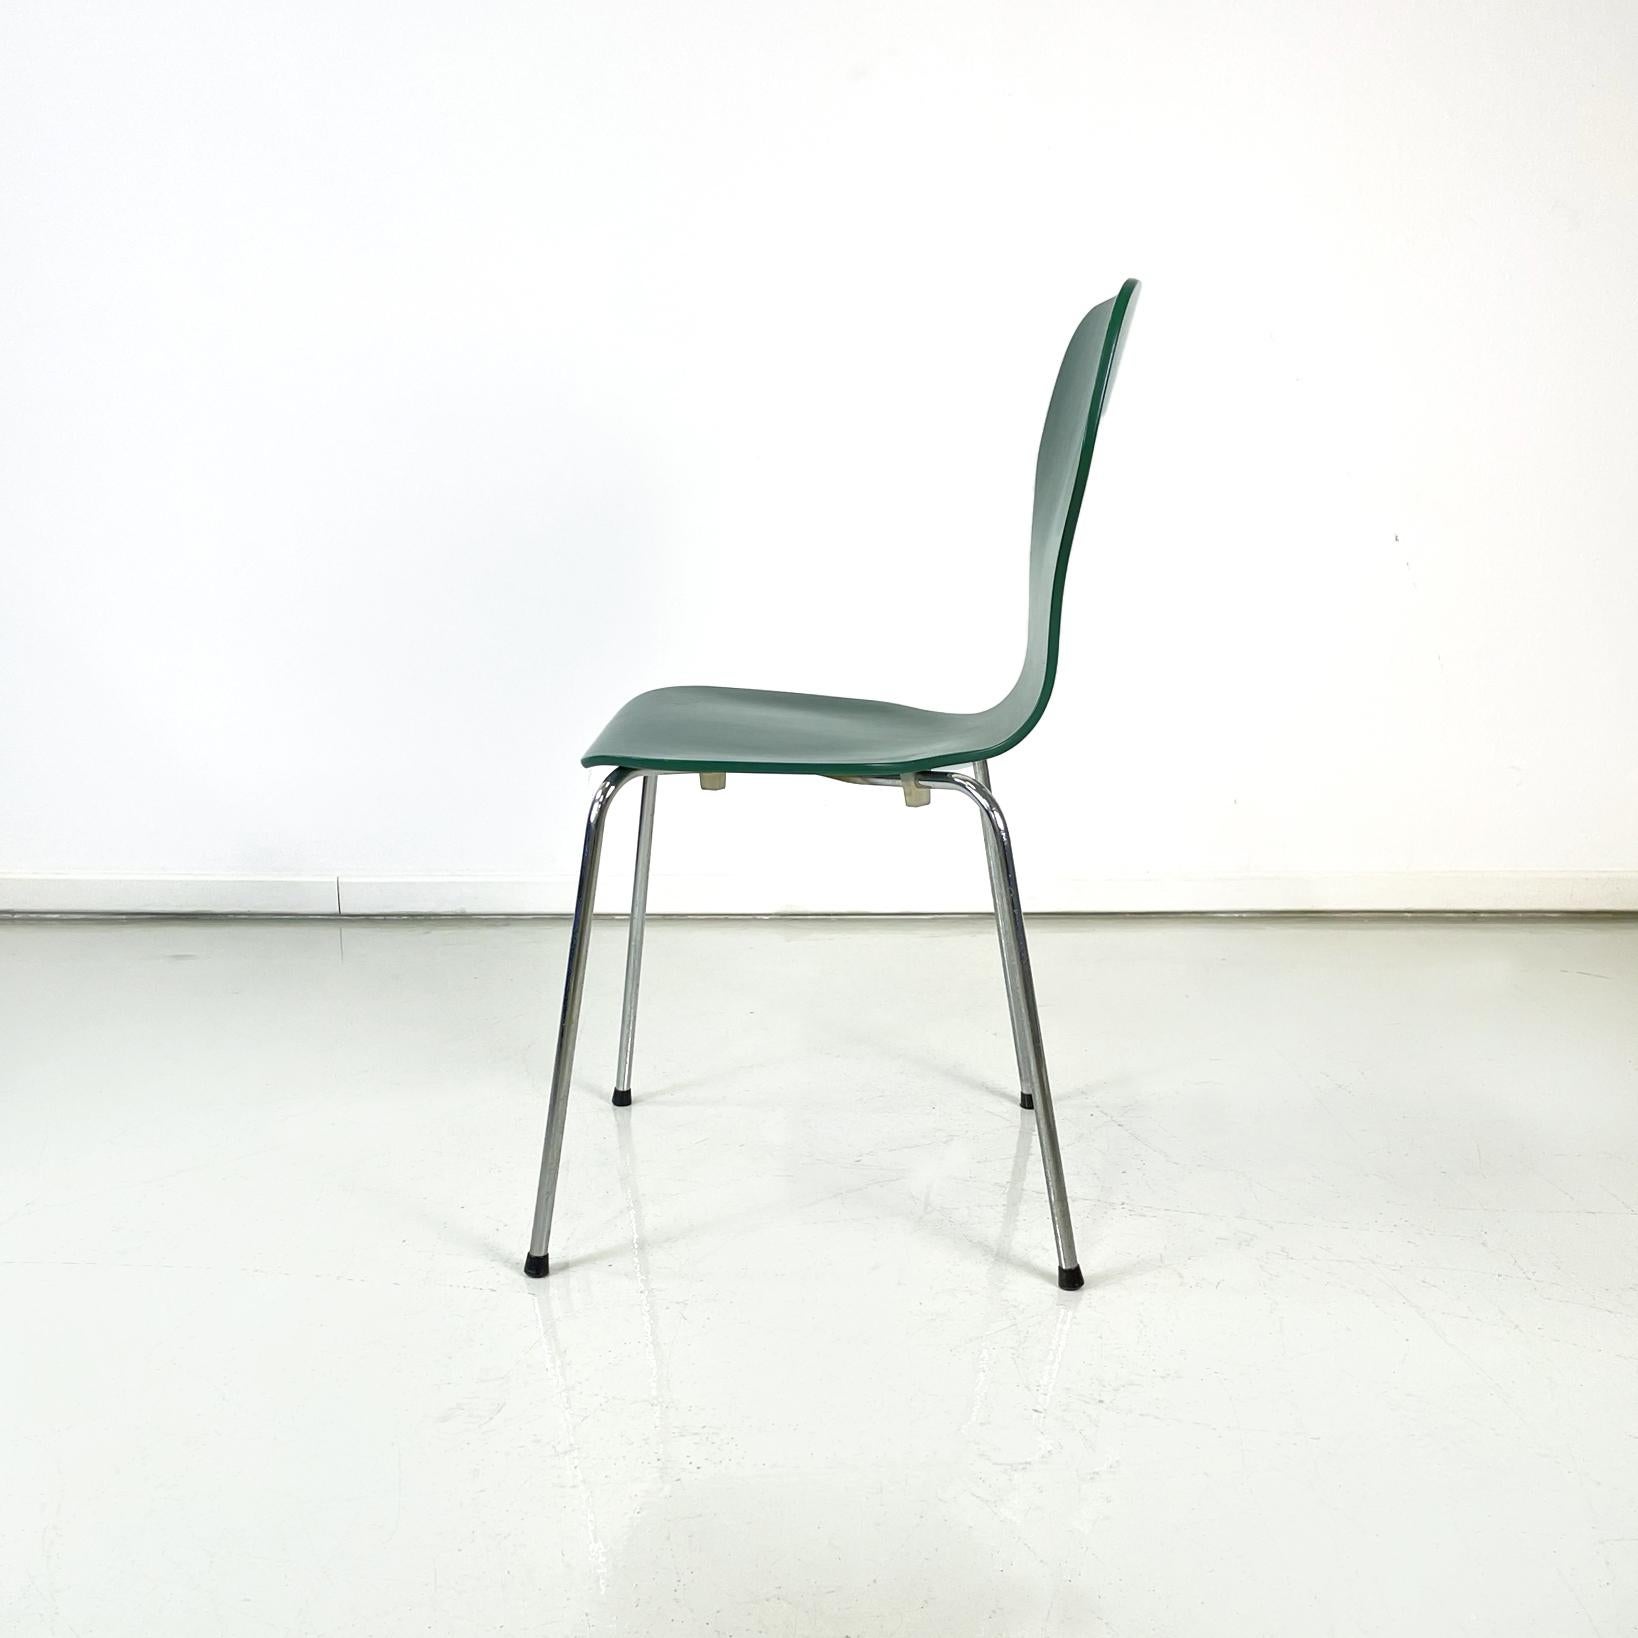 Late 20th Century Danish Modern Green Wooden and Steel Chairs by Phoenix, 1970s